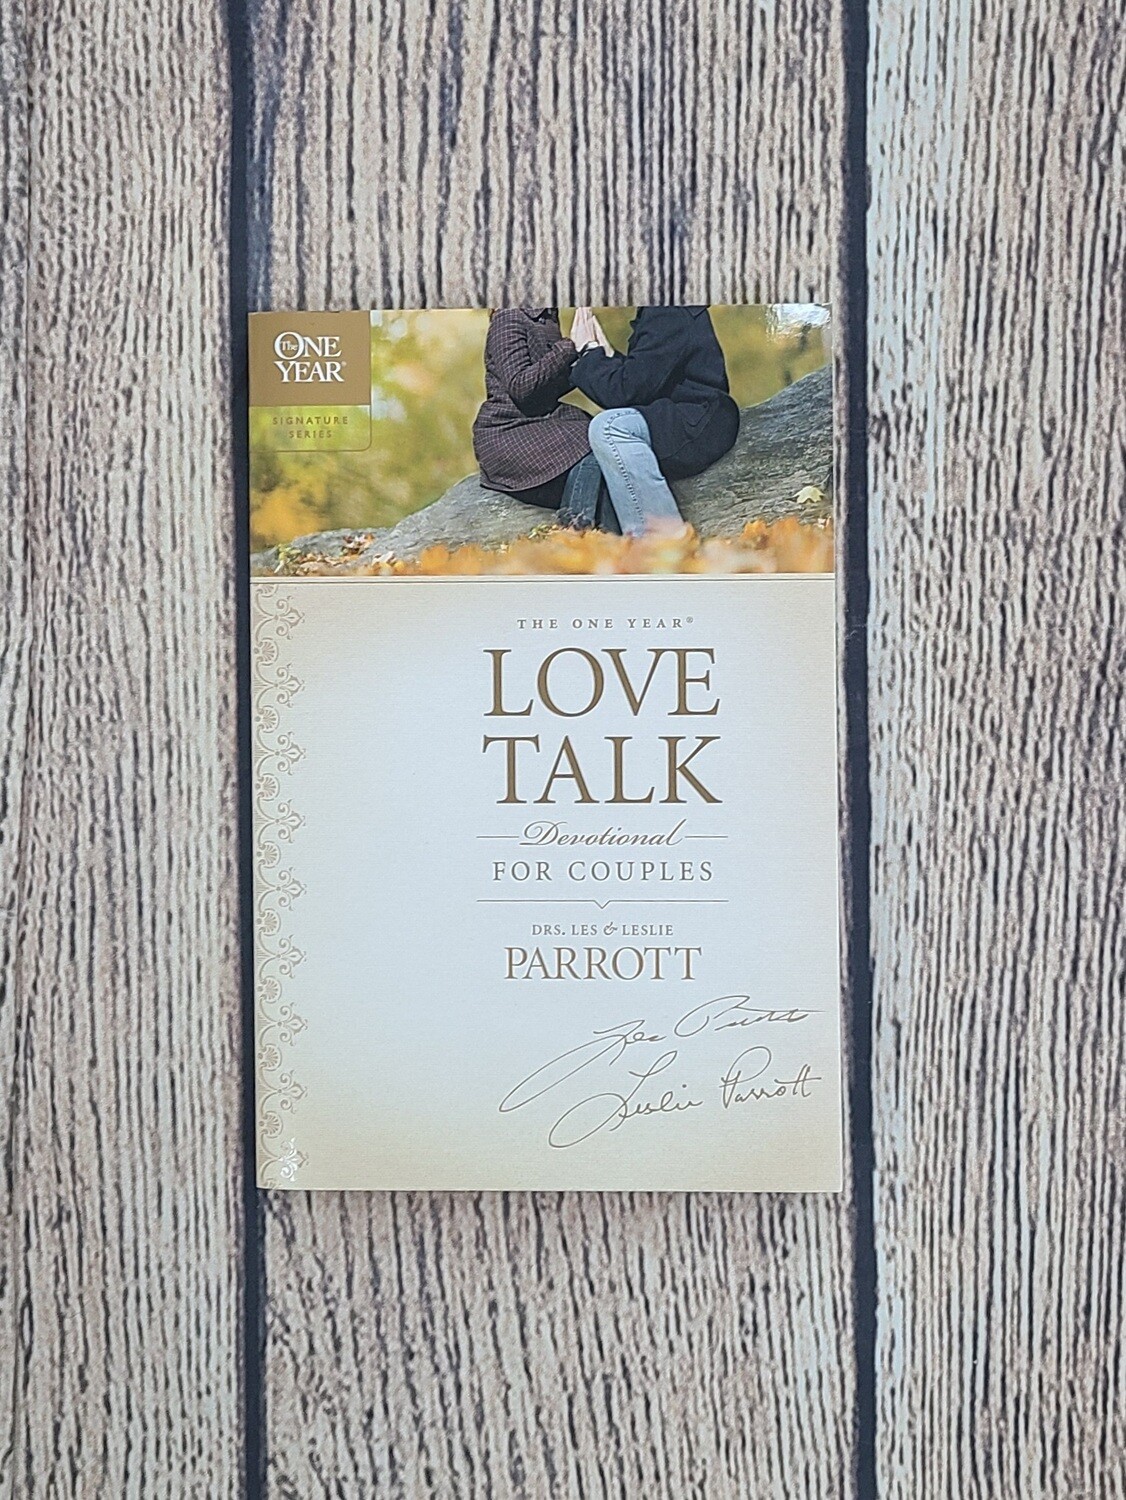 The One Year Love Talk Devotional For Couples by Doctors Les and Leslie Parrott